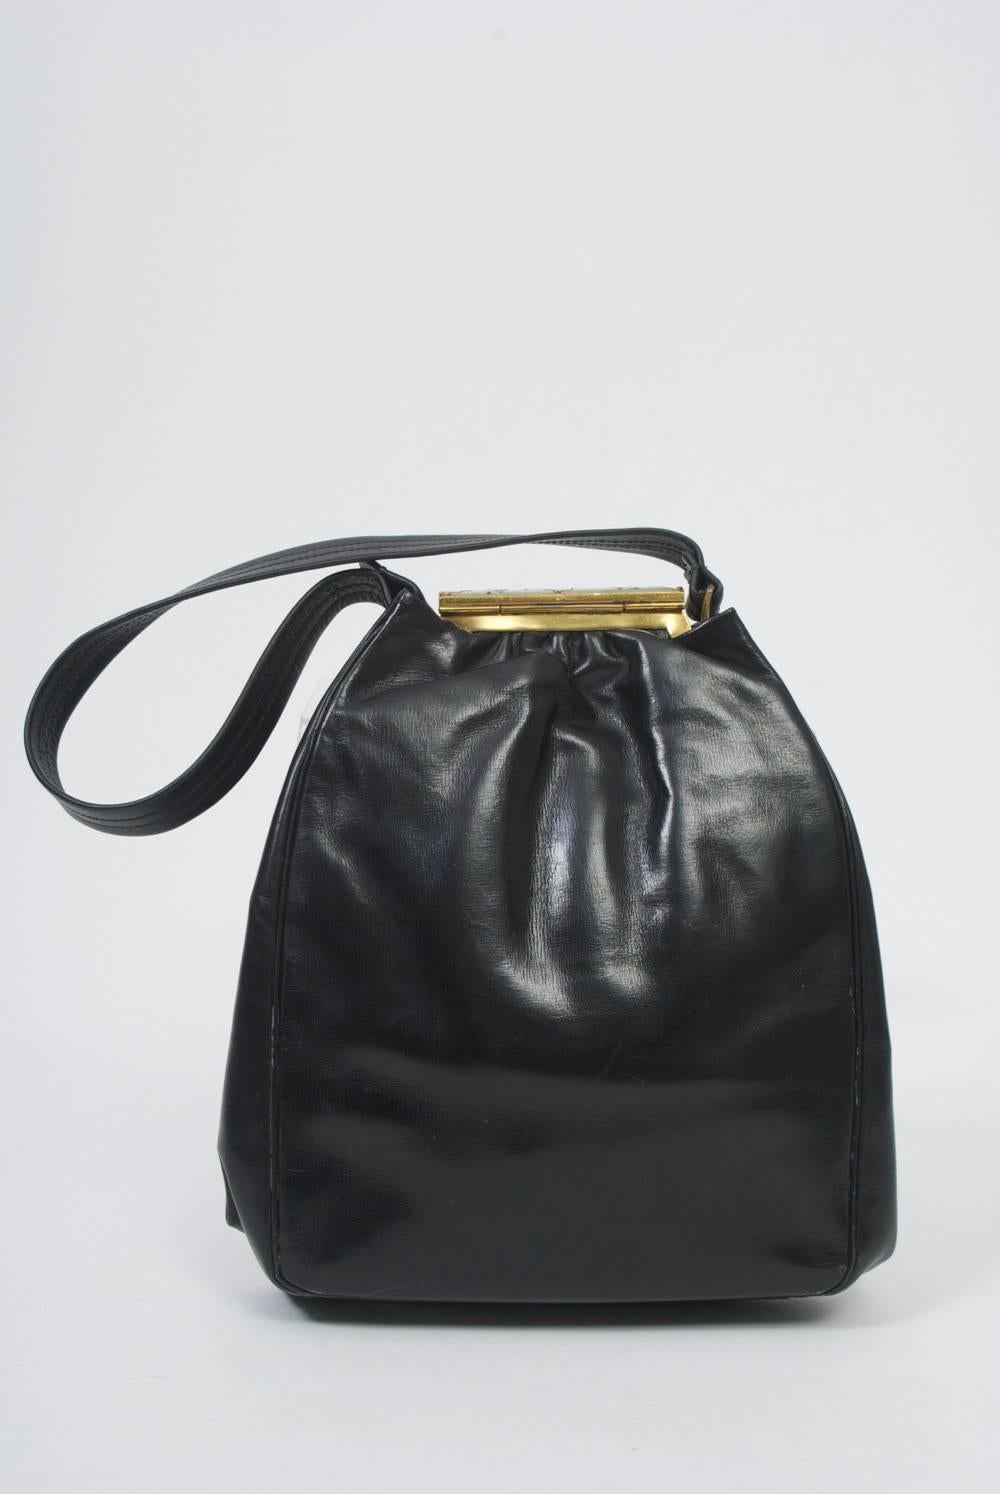 Rosenfeld produced some of the best vintage handbags in America. This example has a black leather body gathered at top where it features a MOP roll bar clasp handpainted with small flowers. Interior is clean with side compartment. Handle has been